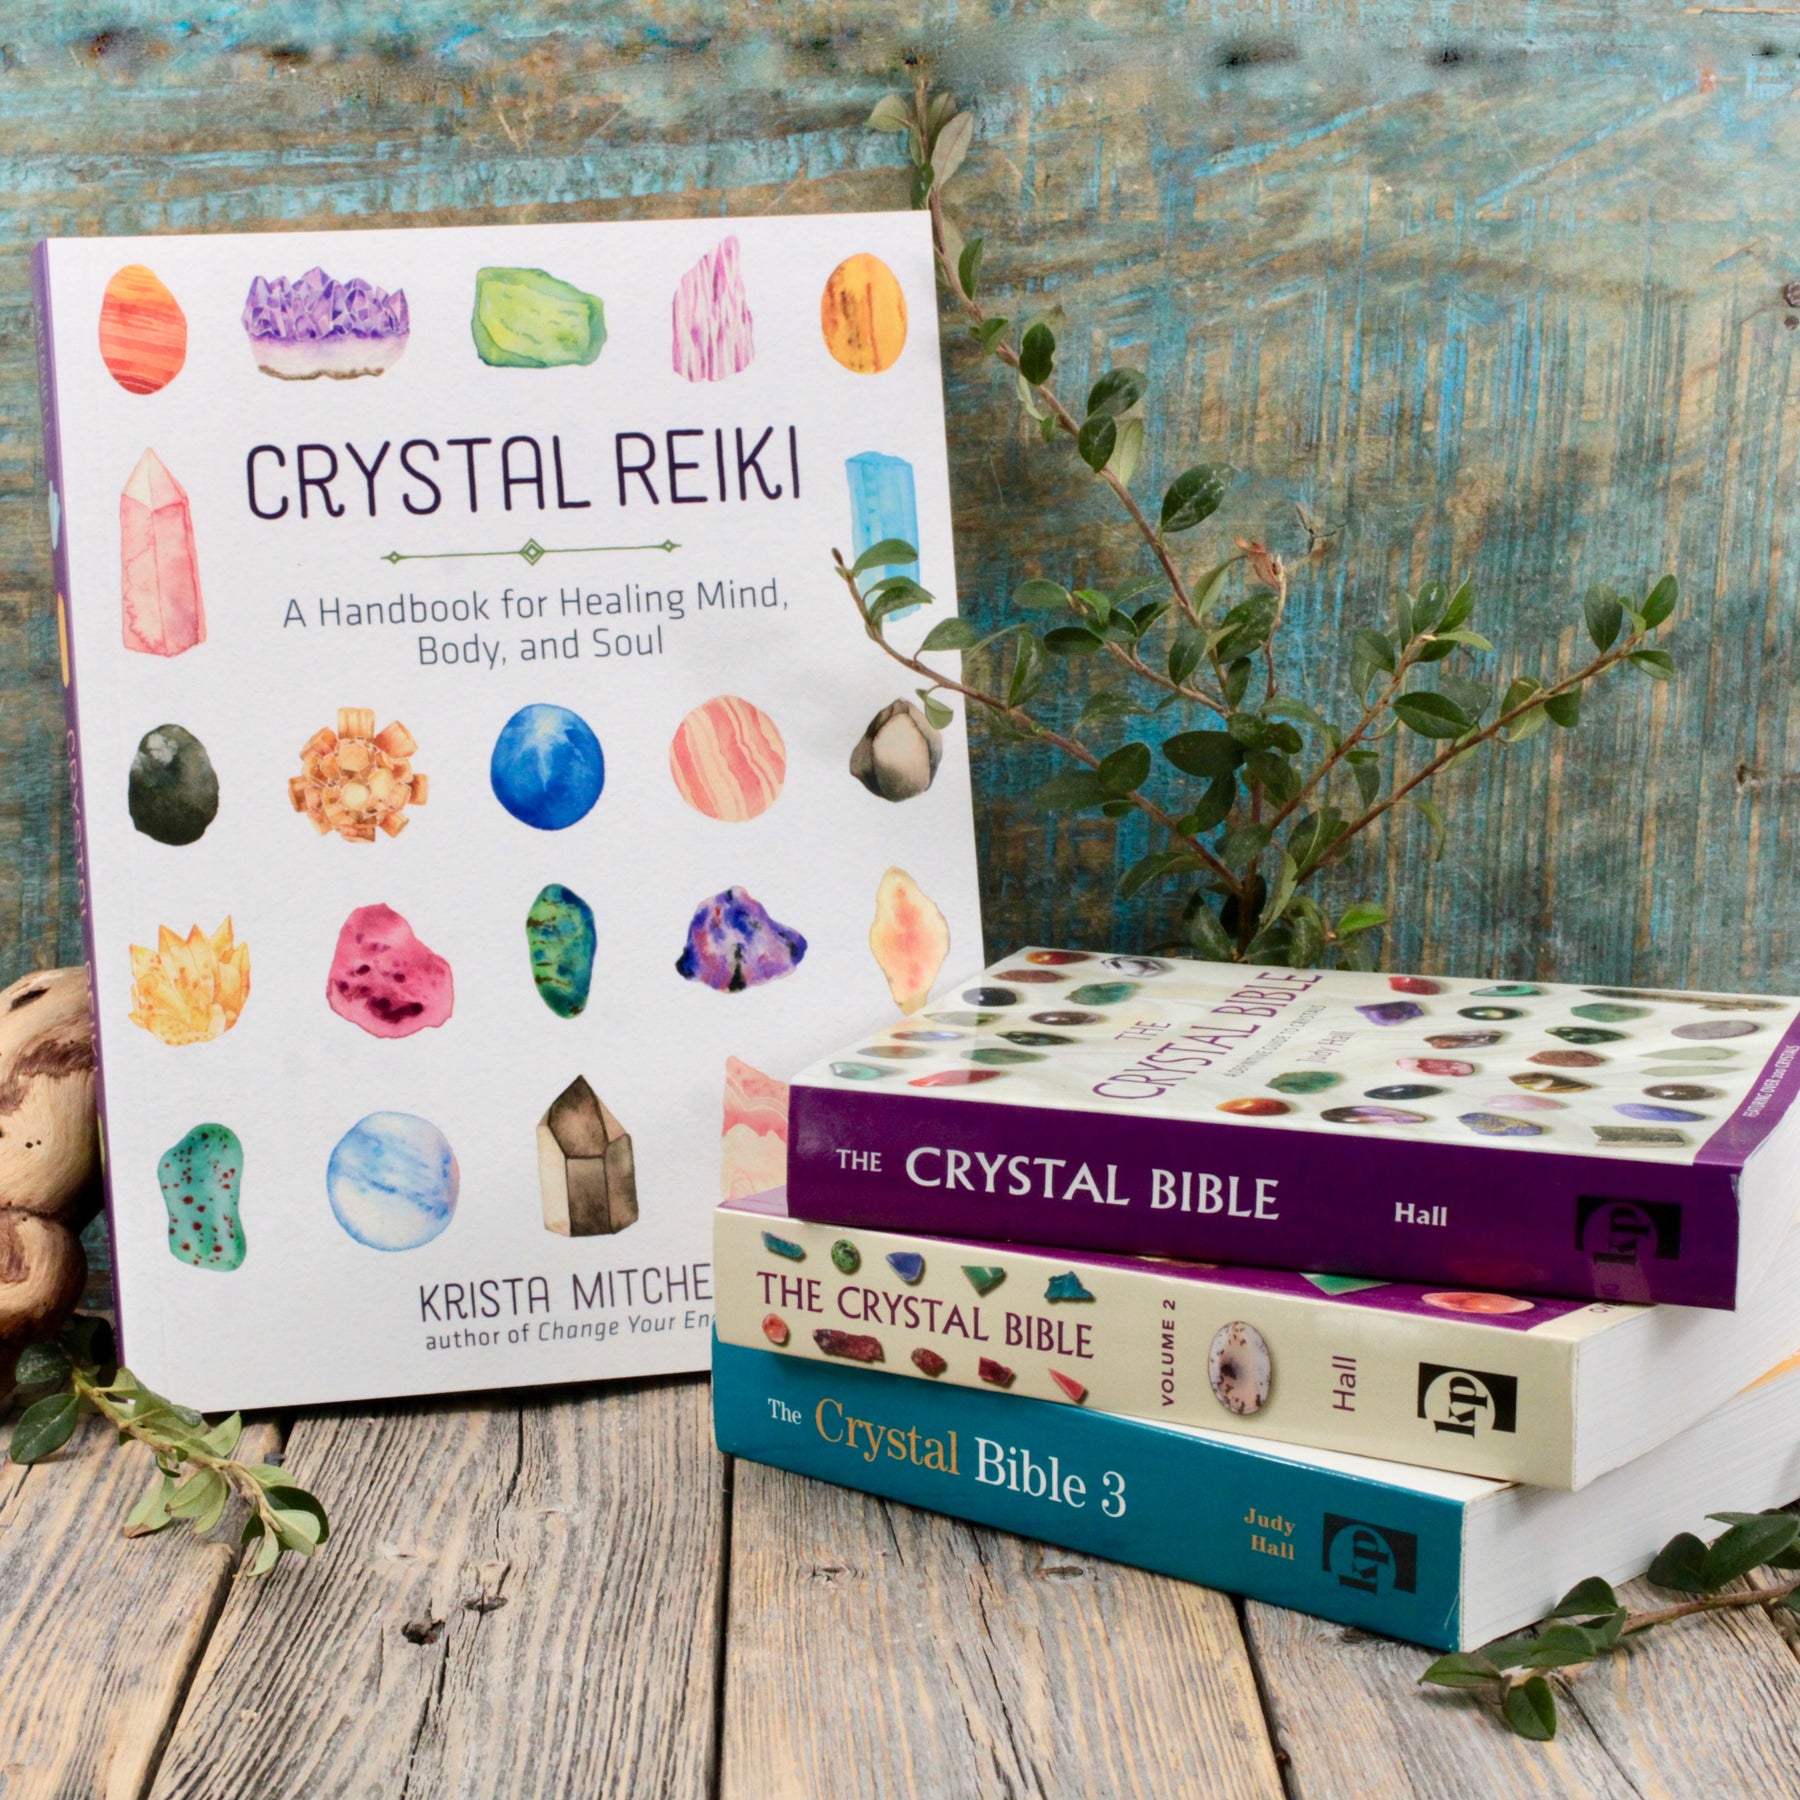 Photo of books about crystals and rocks.